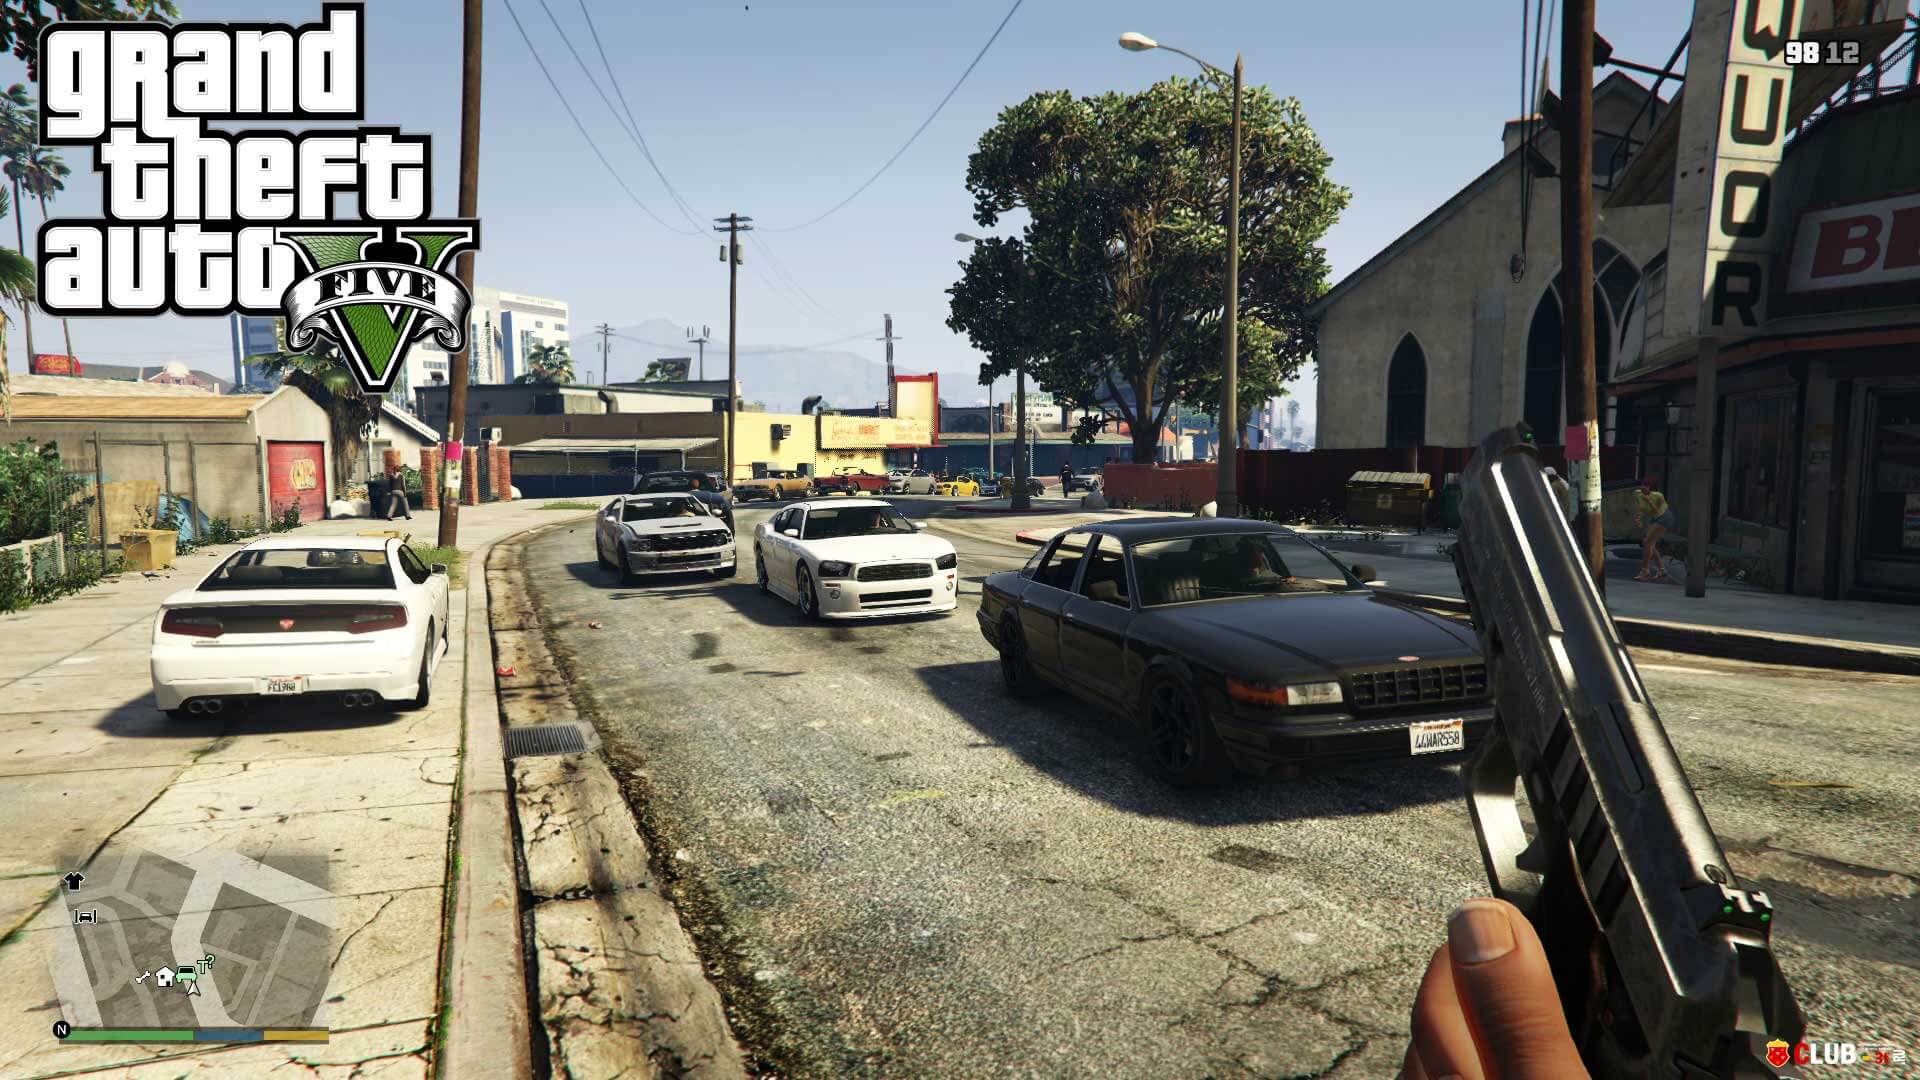 Take-Two CEO Reveals Why GTA 6 Is On The Way When GTA V Is Still Profitable - Gameranx